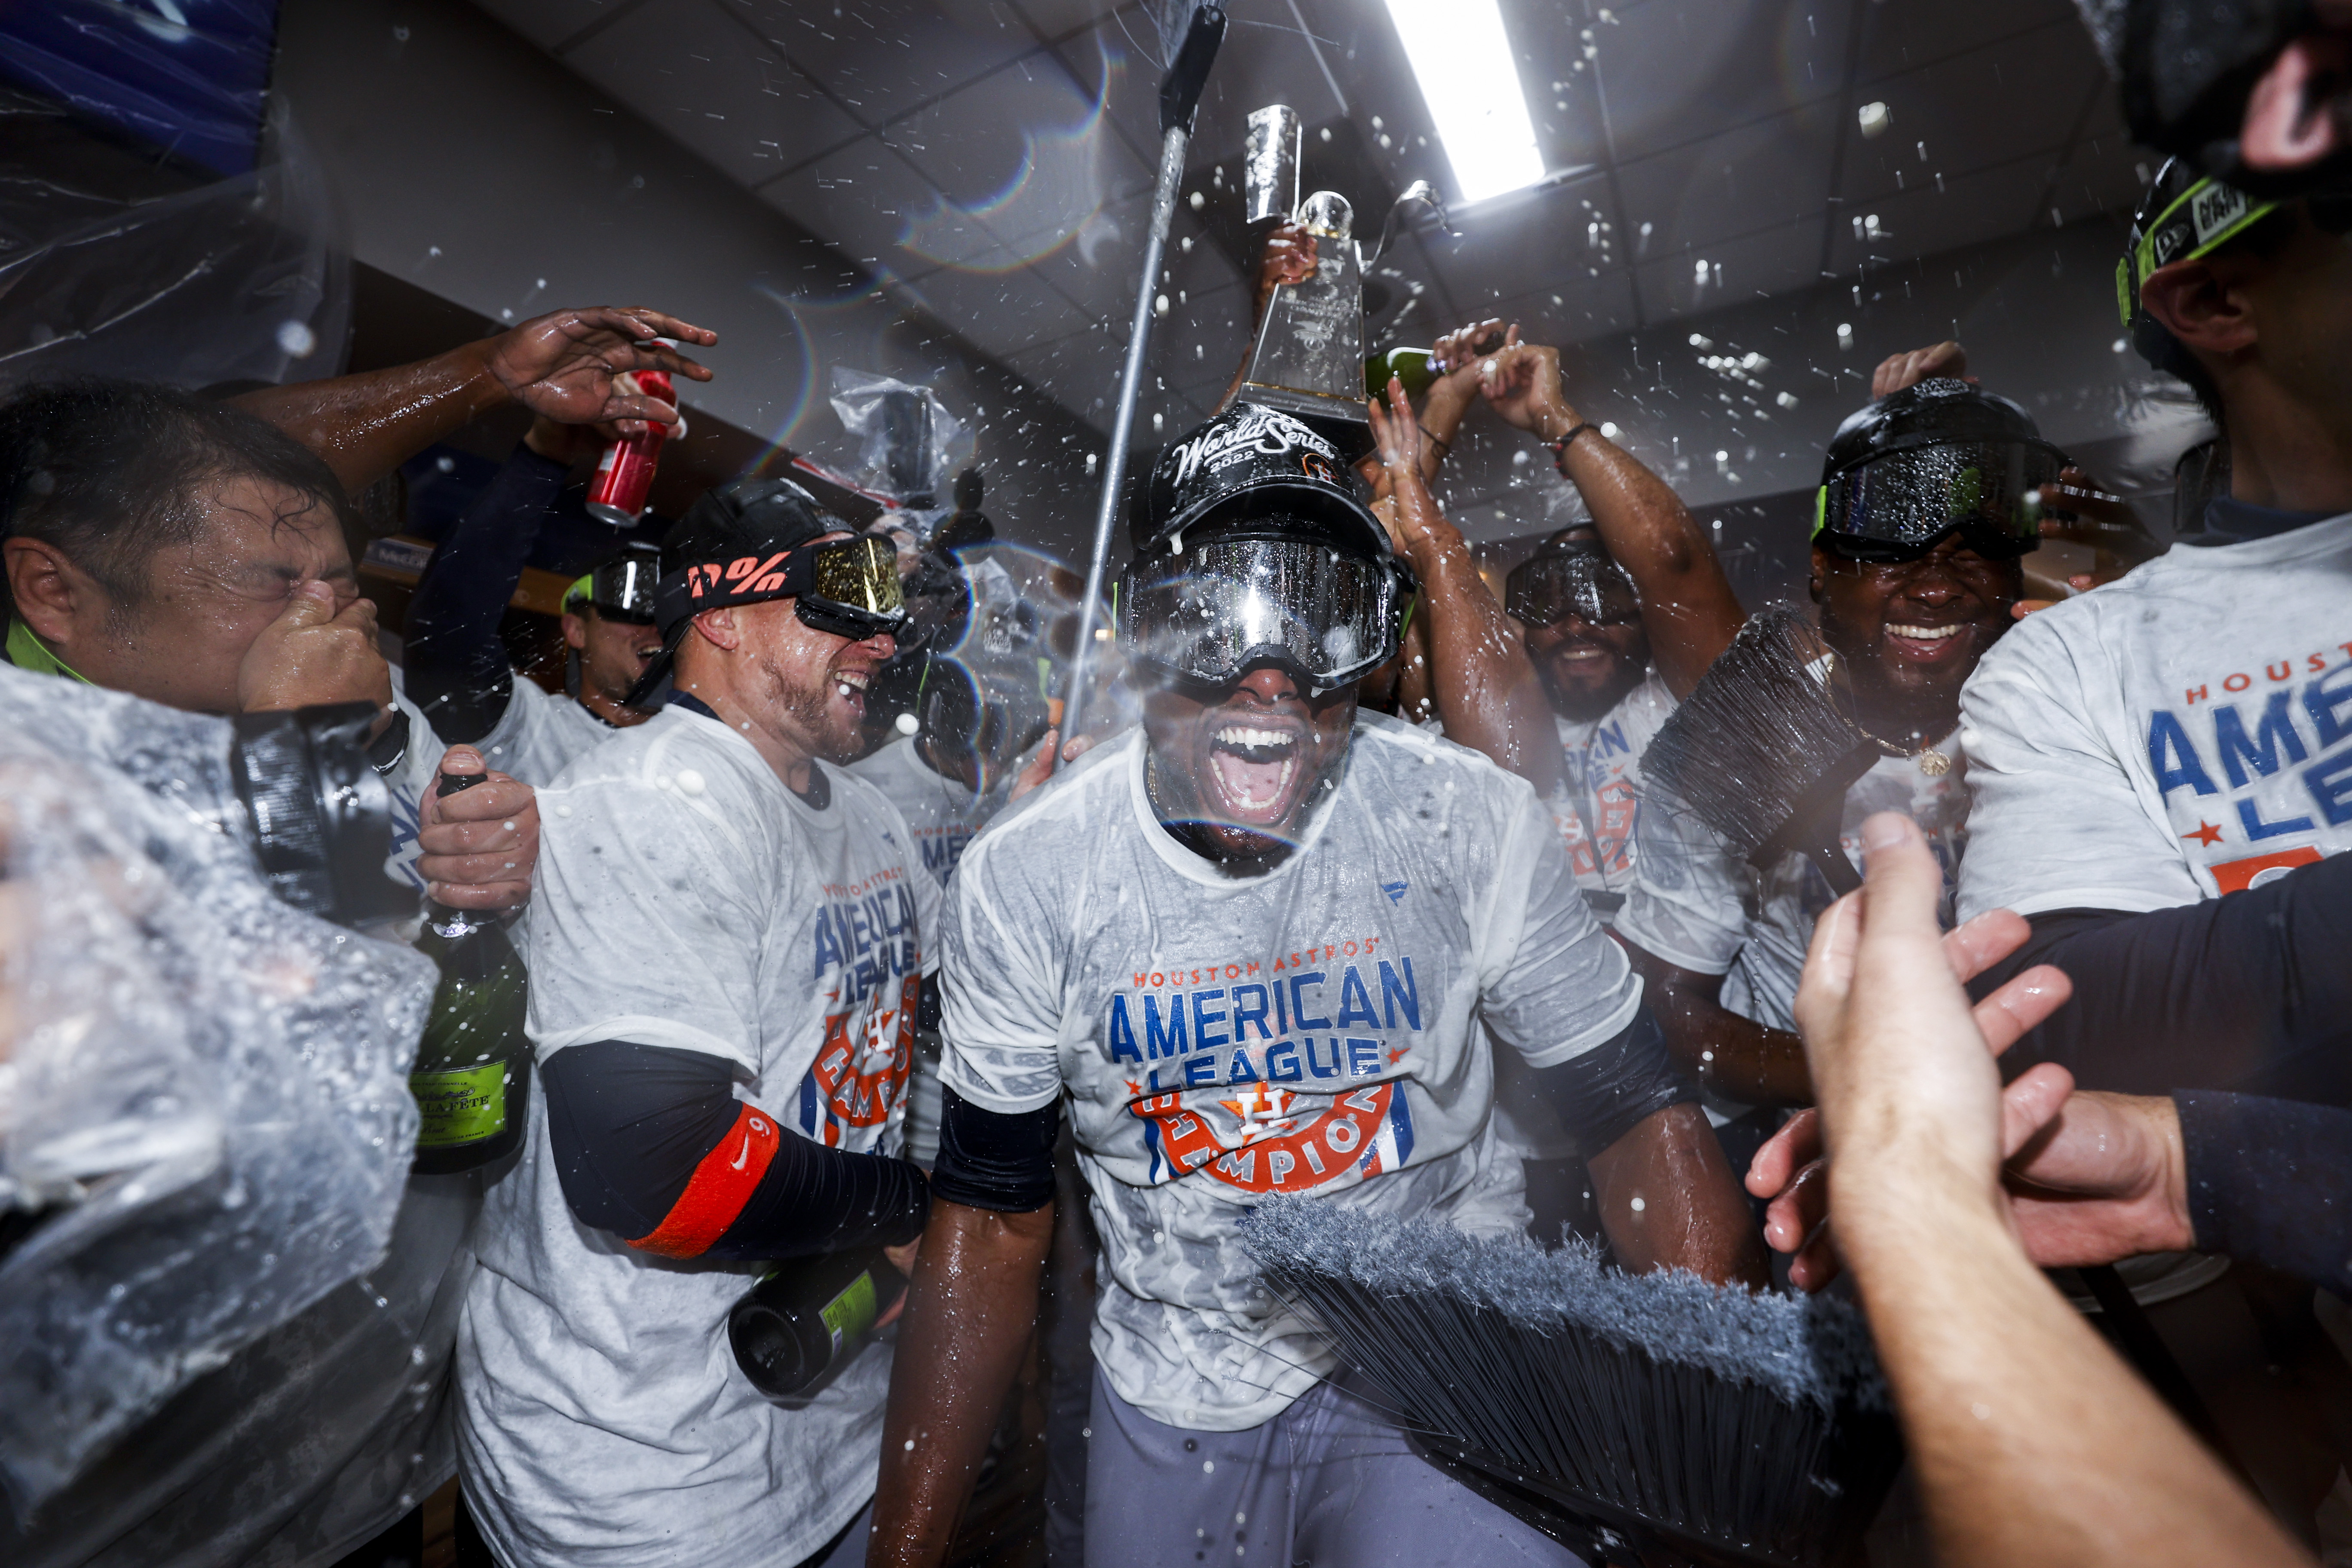 Potential PROOF the Houston Astros were cheating in the 2017 Postseason  including the World Series 